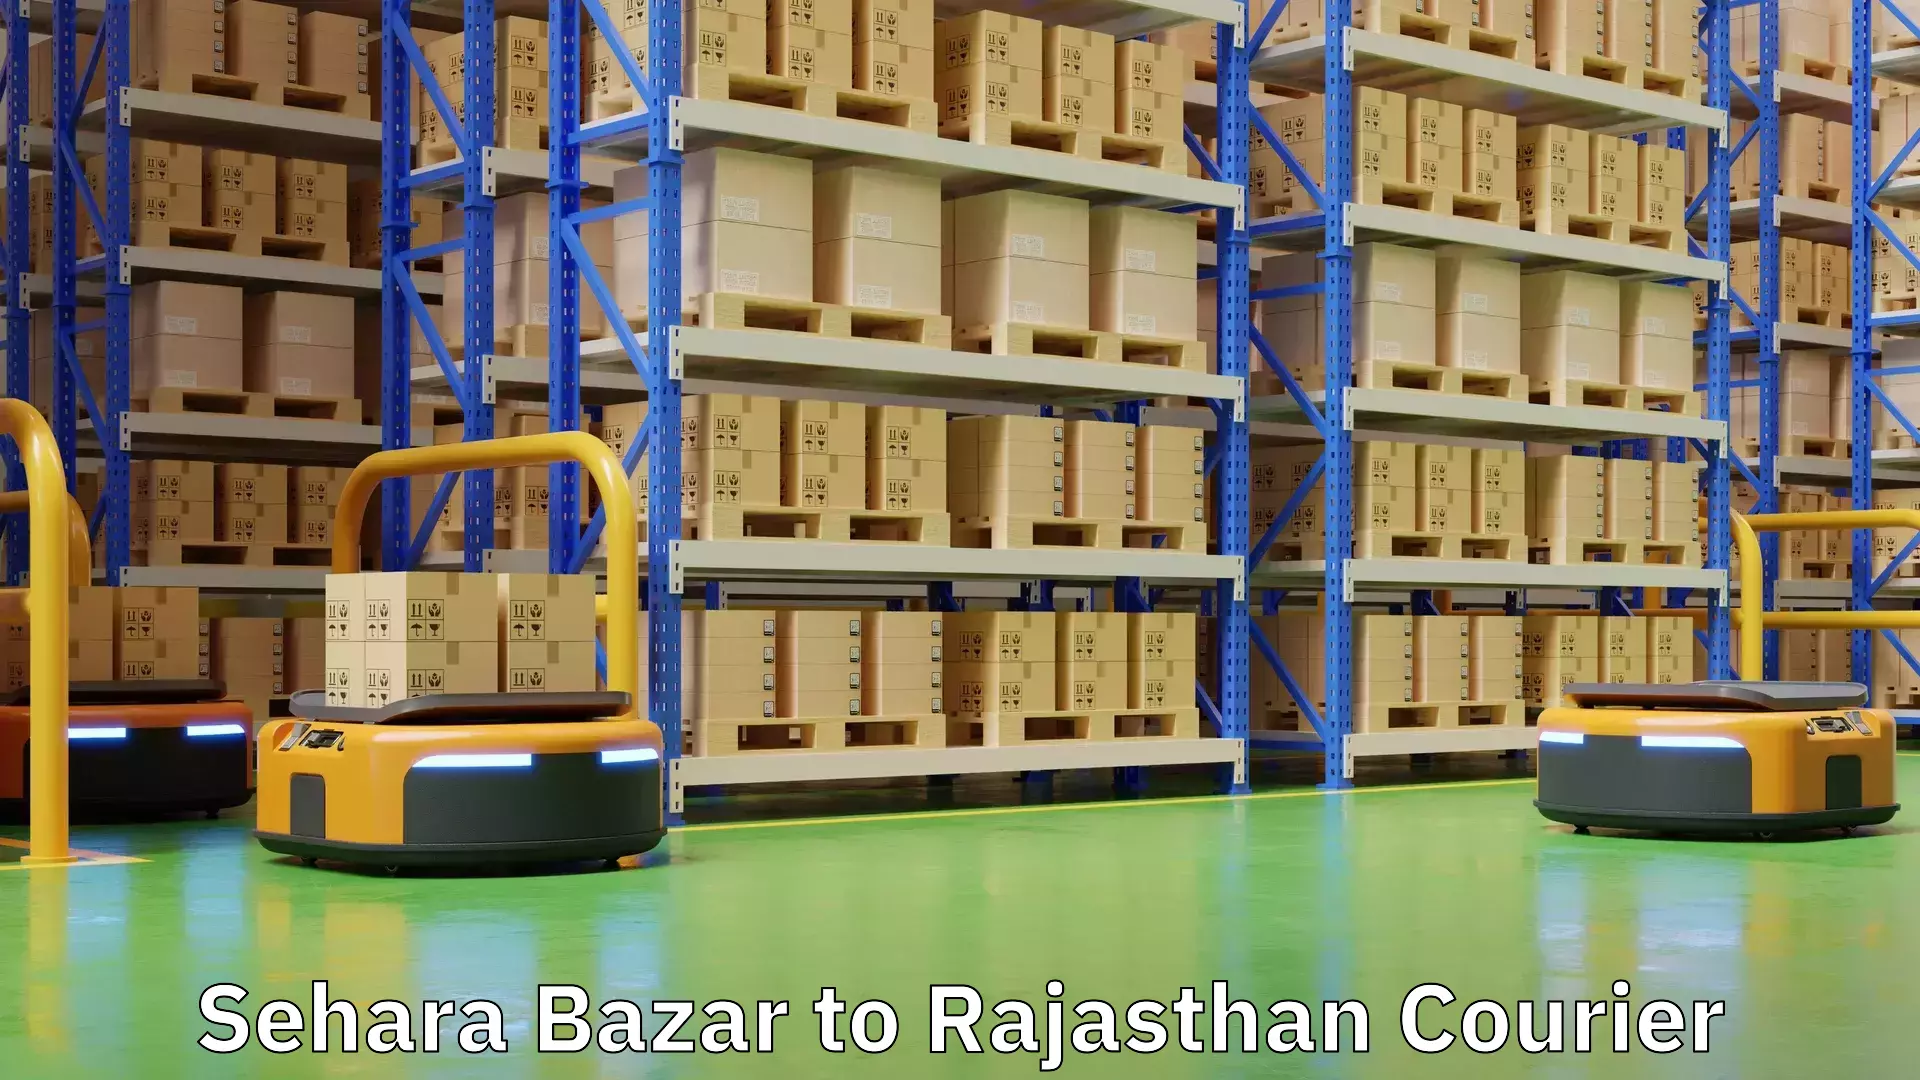 Quality courier services Sehara Bazar to Rajasthan